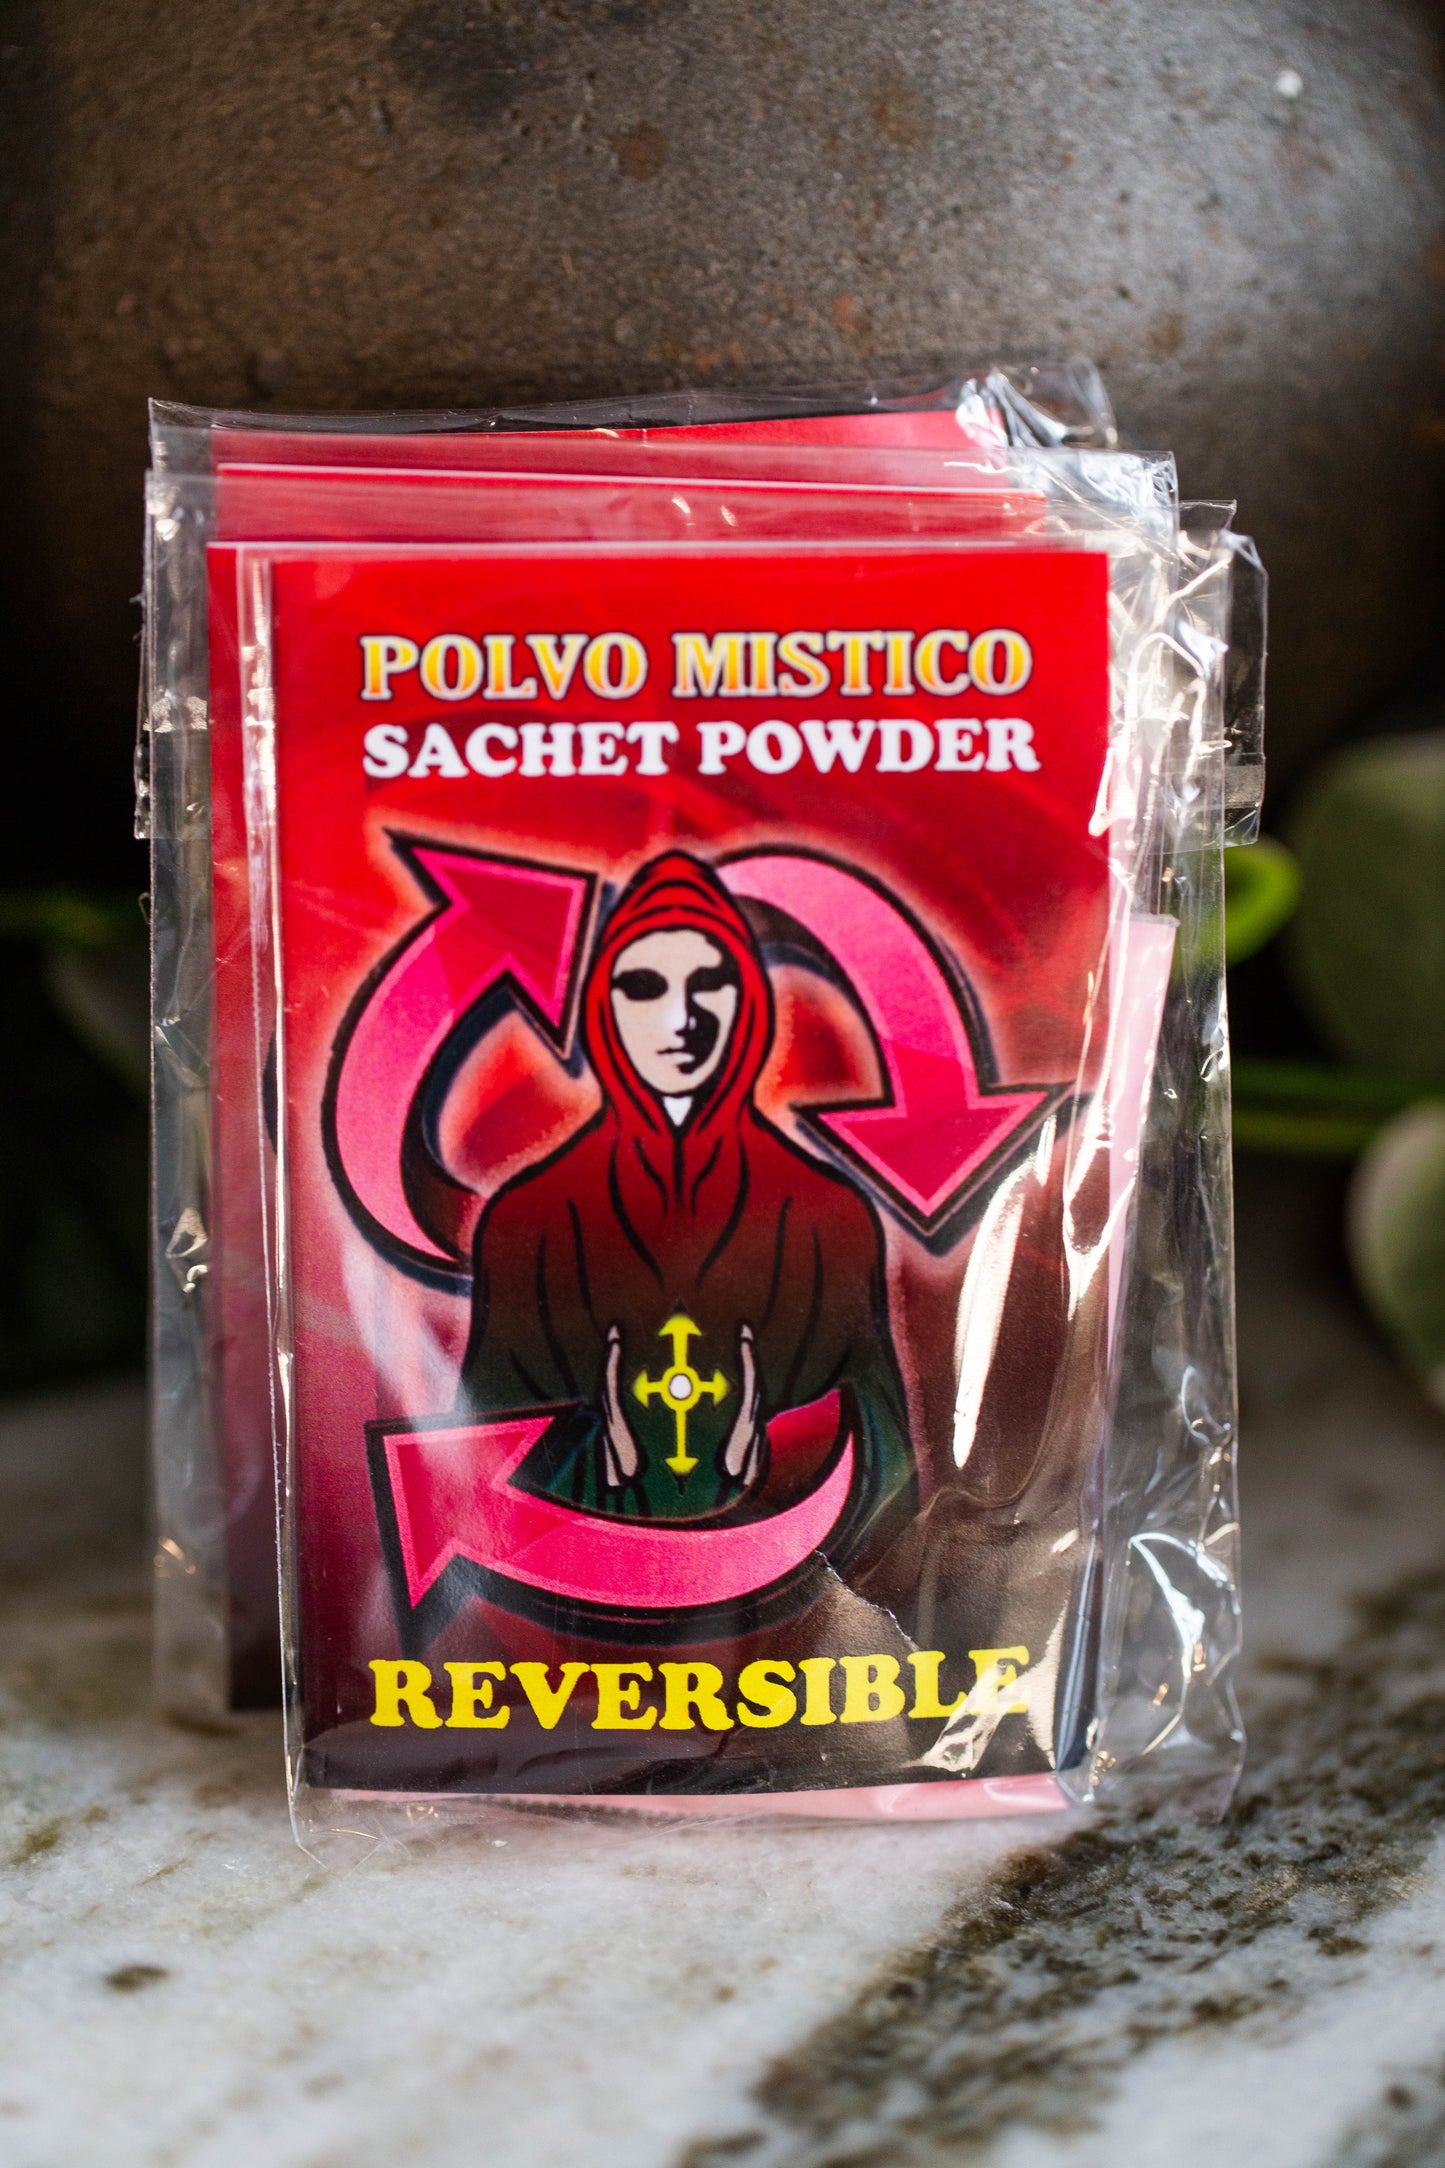 Polvo Mistico - REVERSIBLE - Sachet Powder for return to sender, reverse anything sent to you, send back to person who sent it